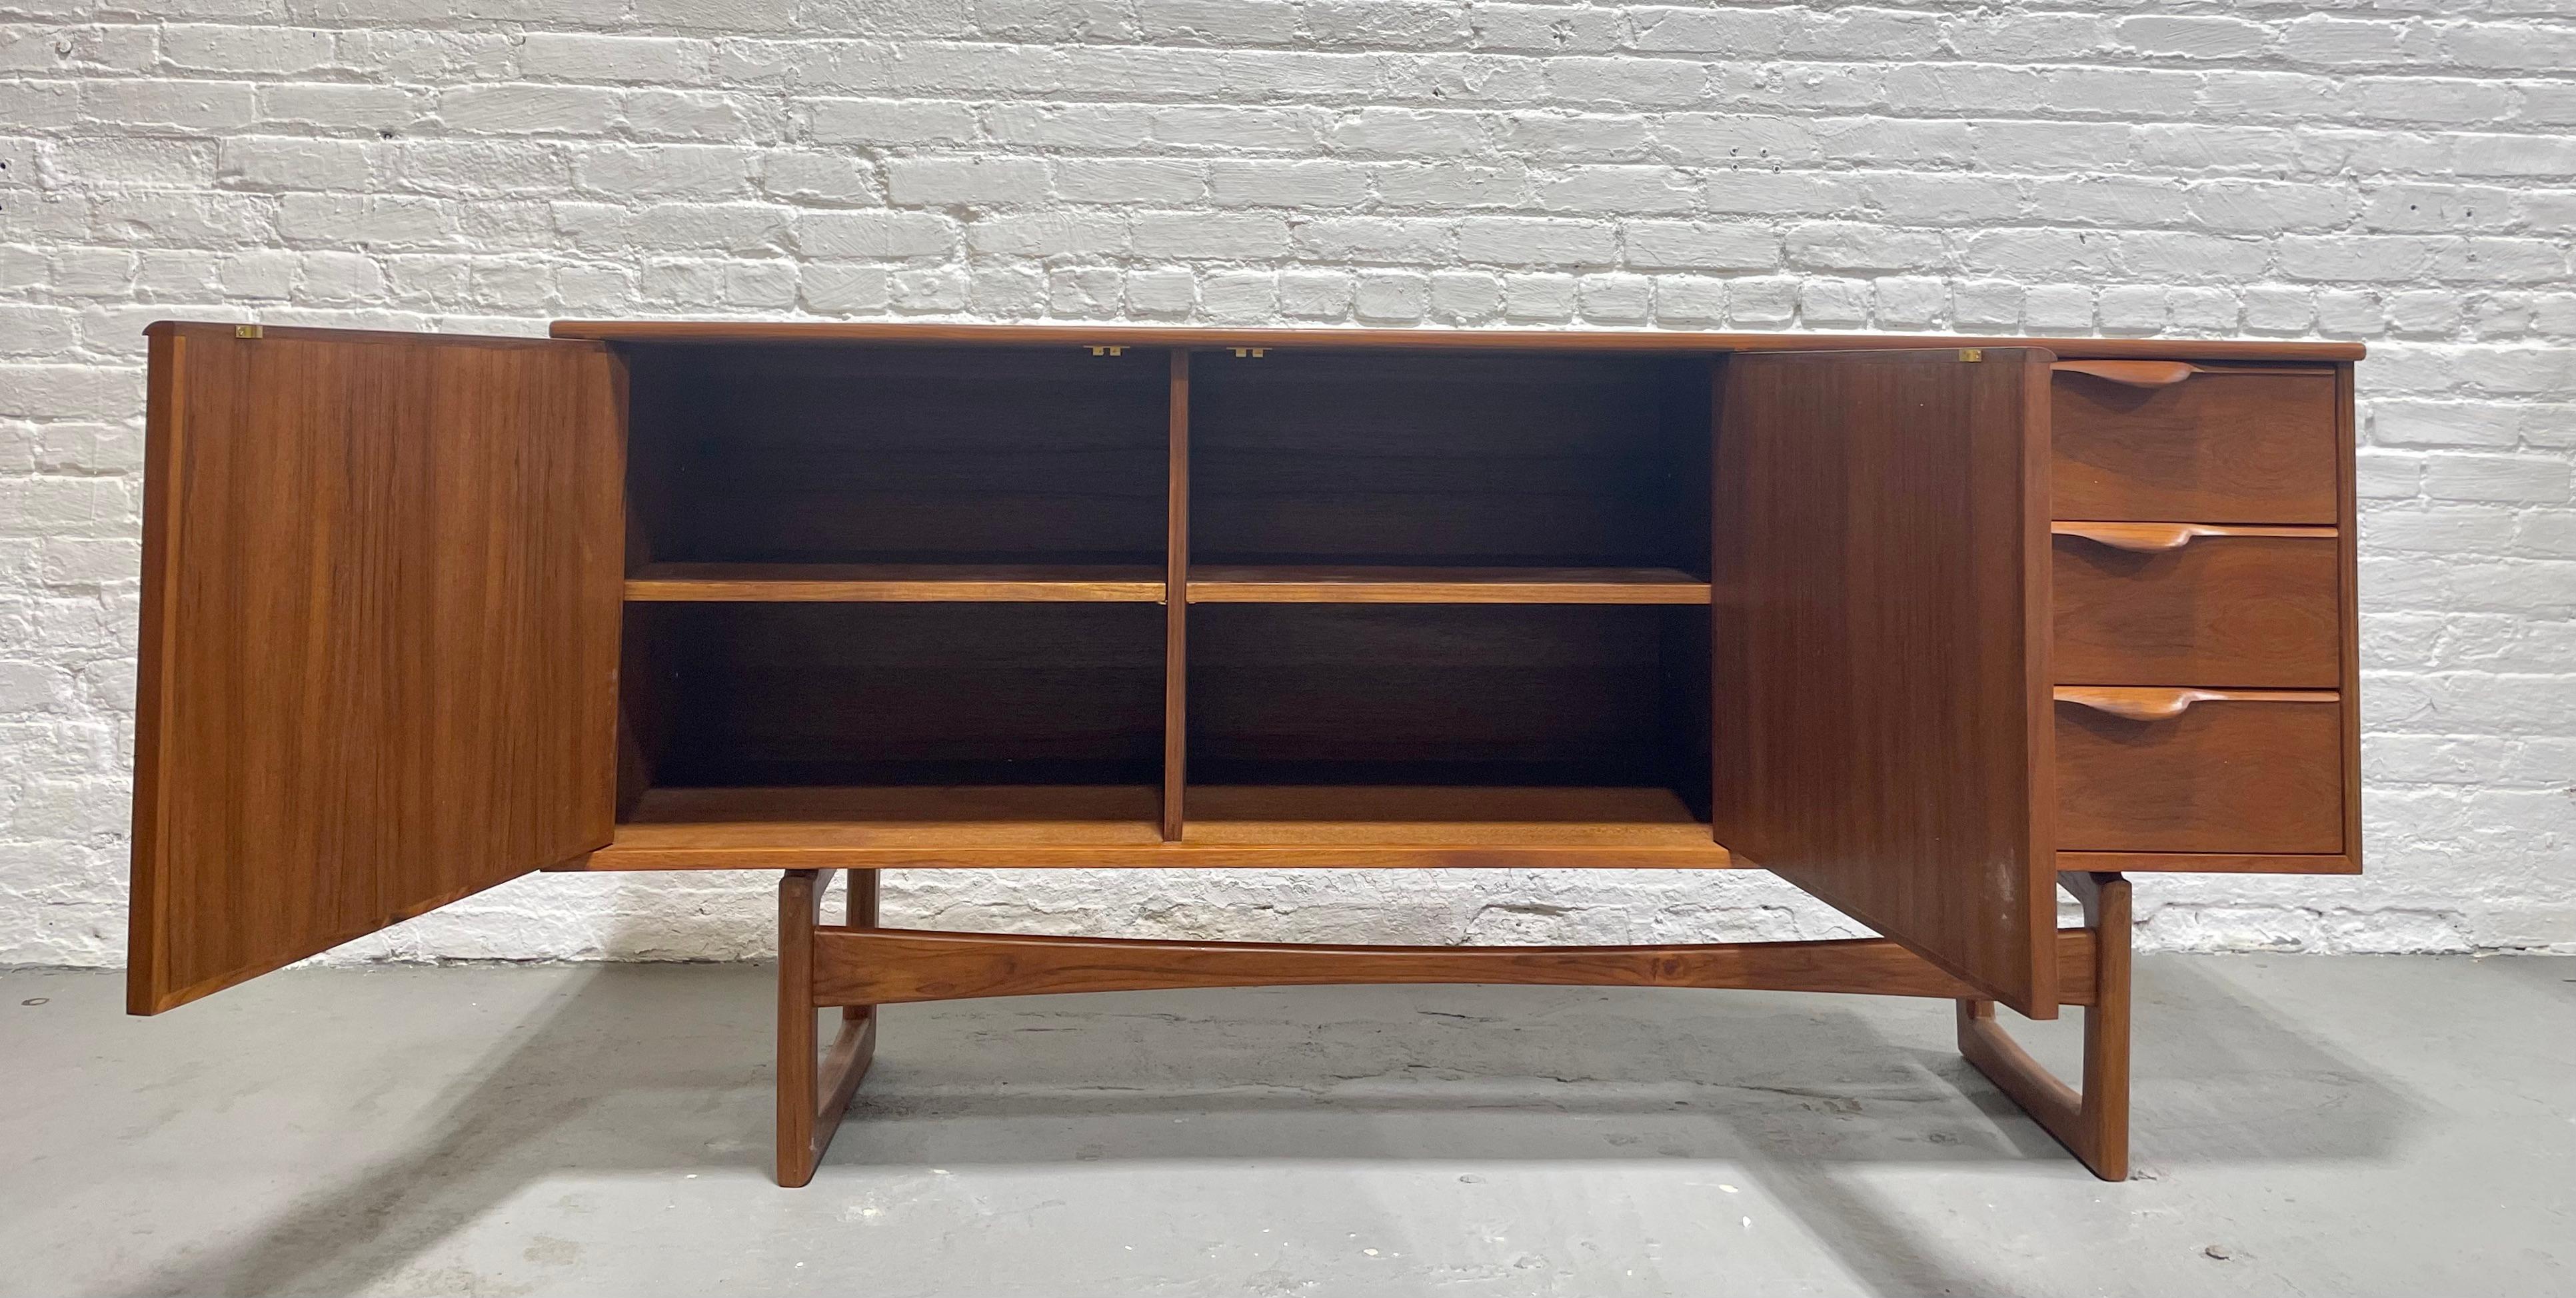 Wood Sculpted Mid-Century Modern Danish Styled Credenza Media Stand For Sale